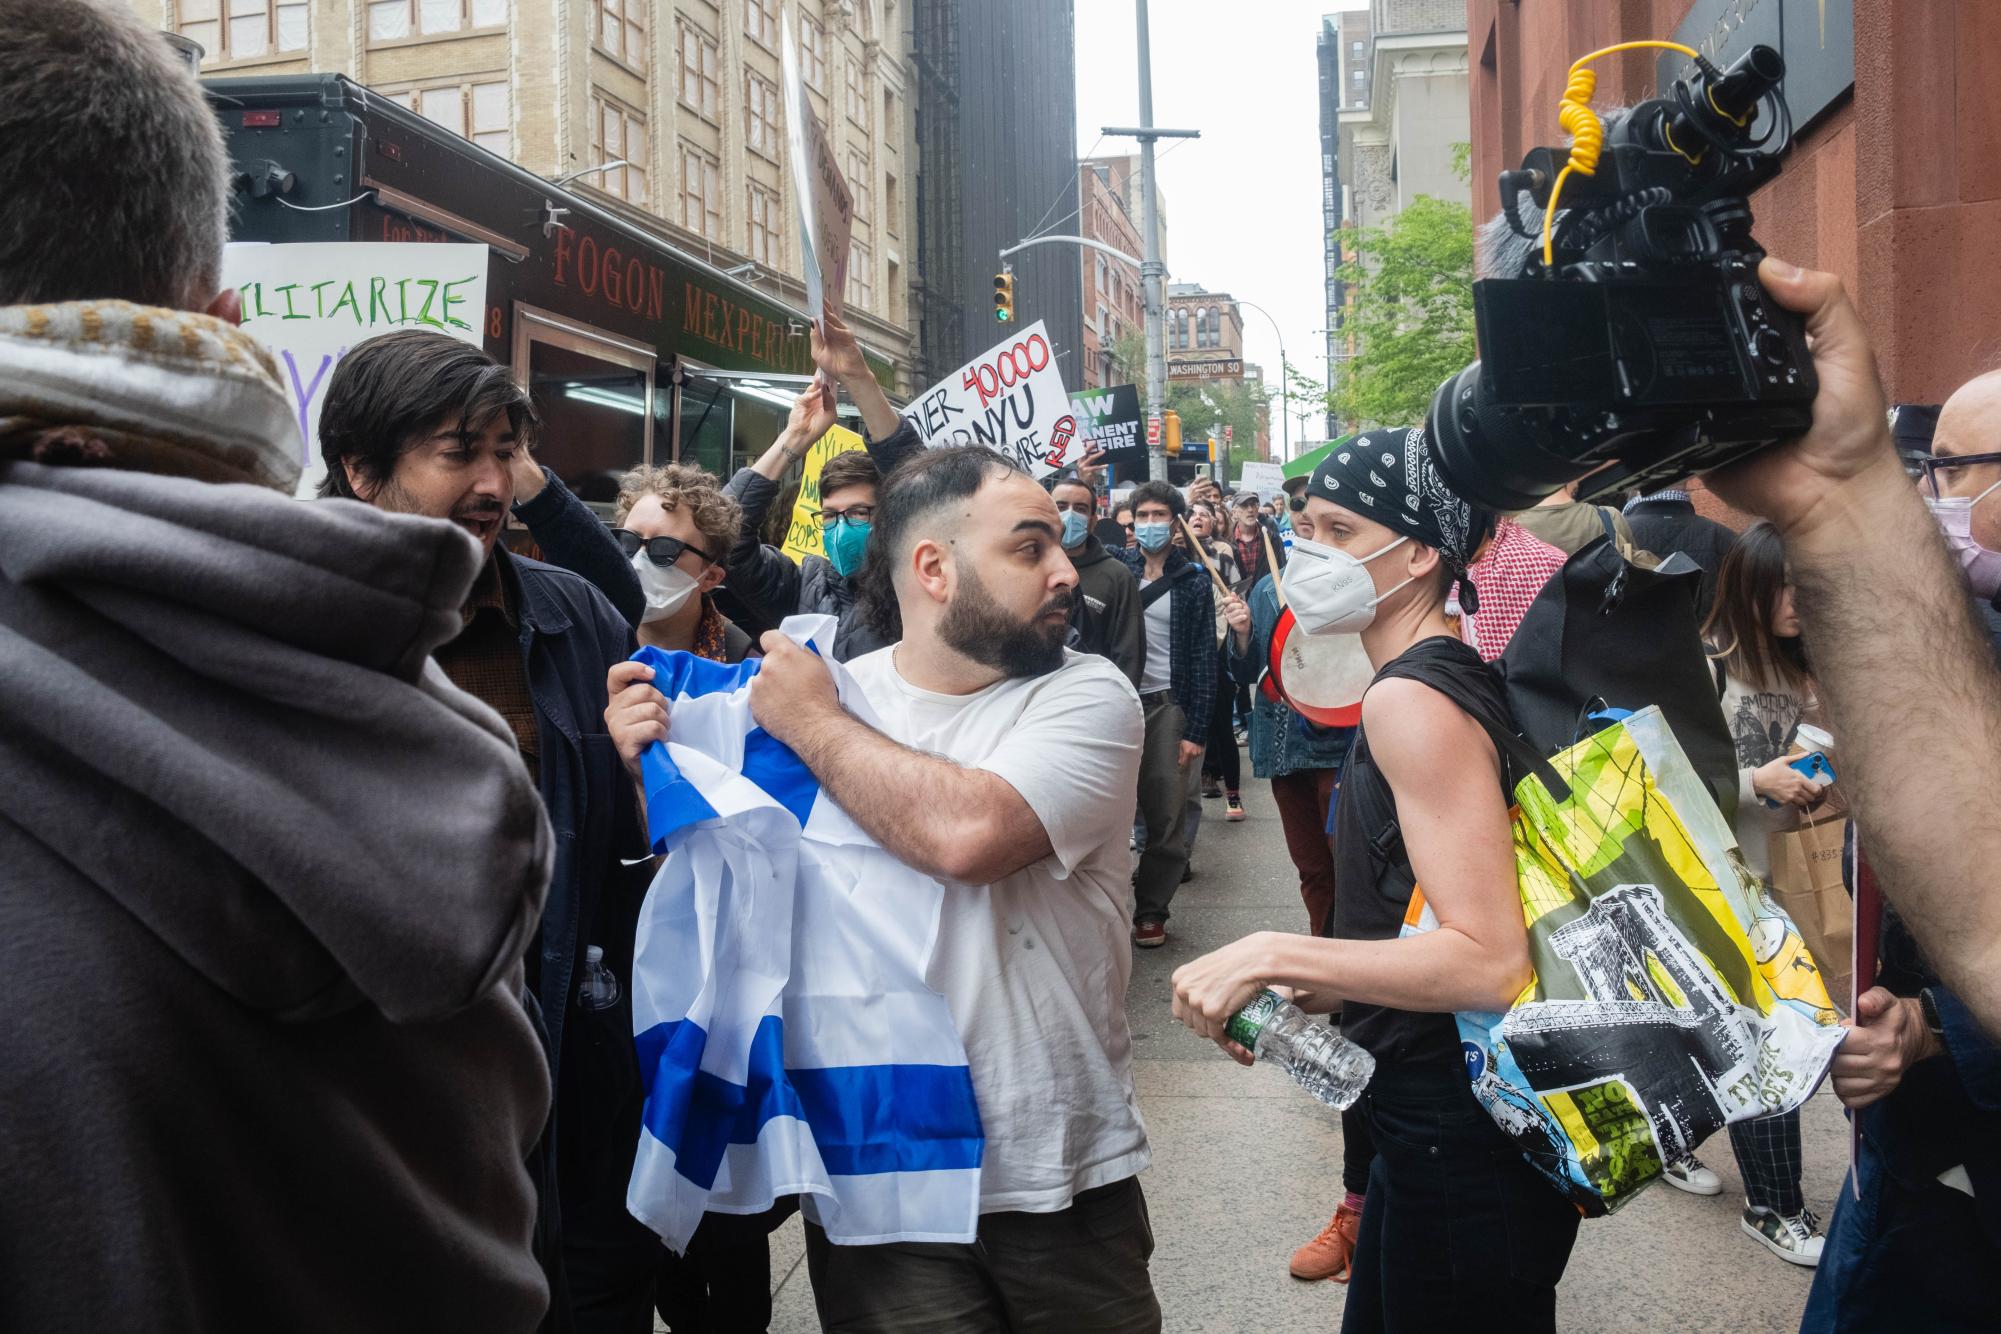 A counterprotester holding an Israeli flag confronts a protester in front of Bobst Library.